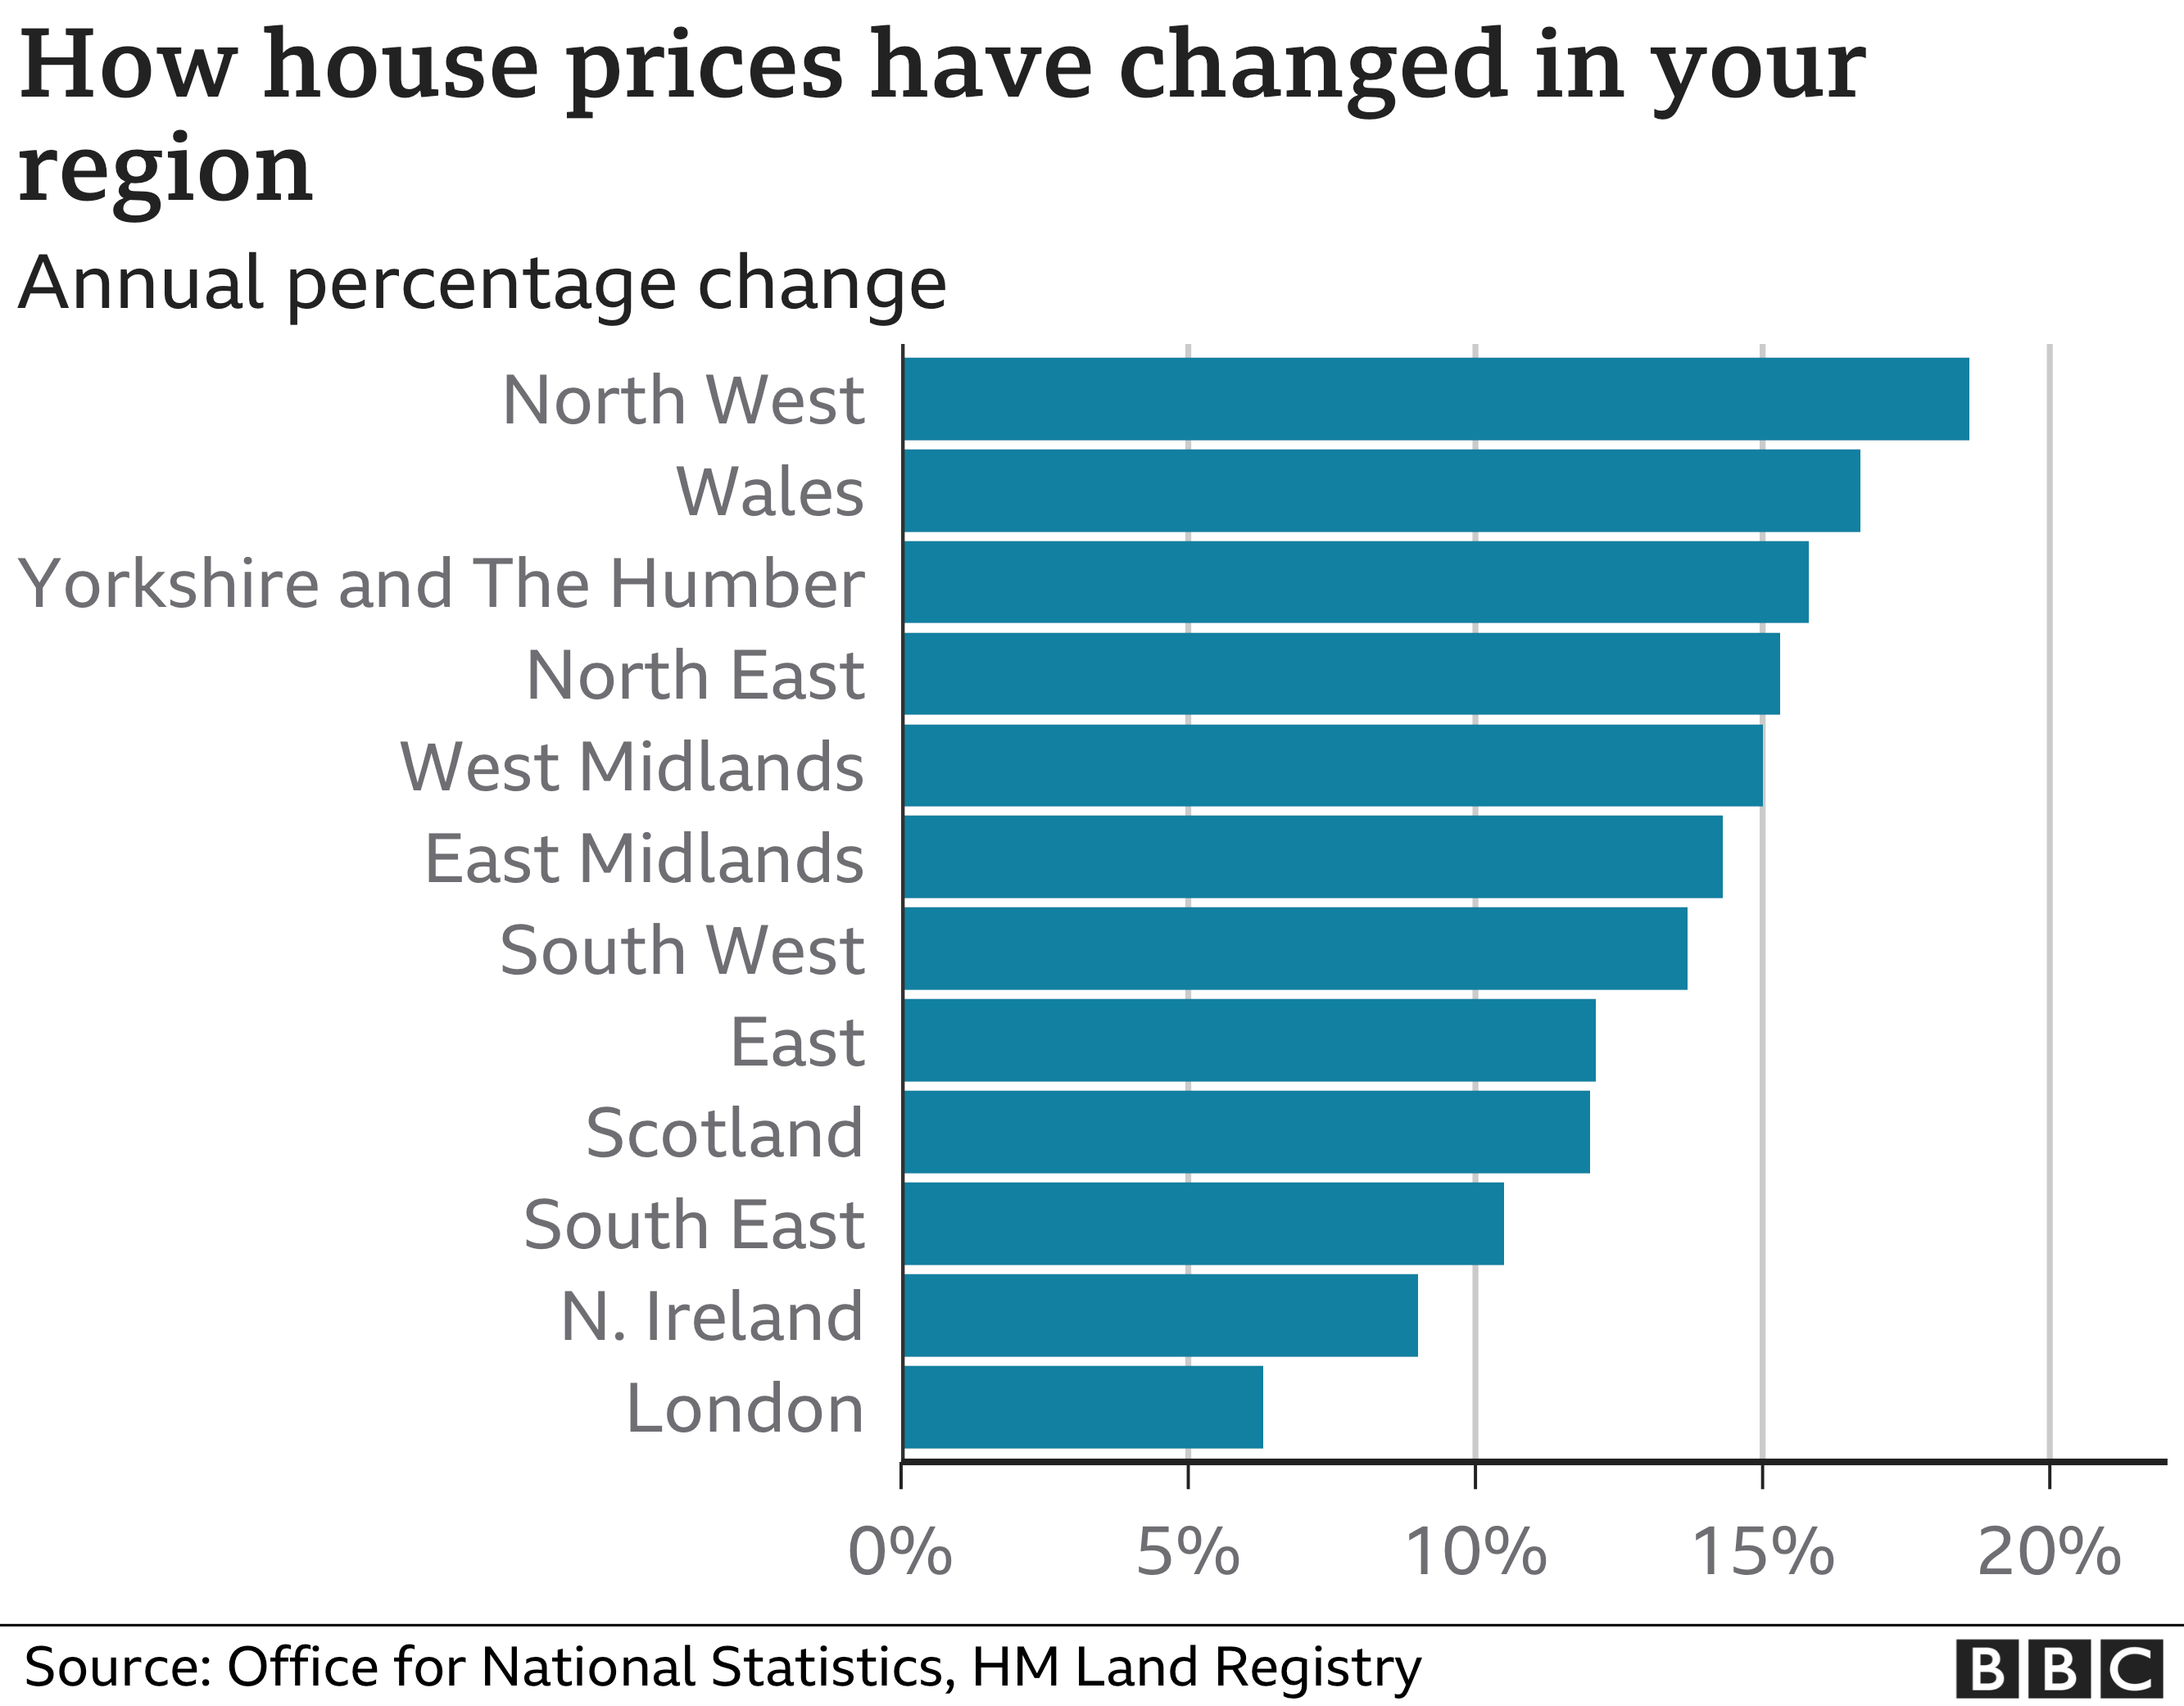 How house prices have changed in your region chart